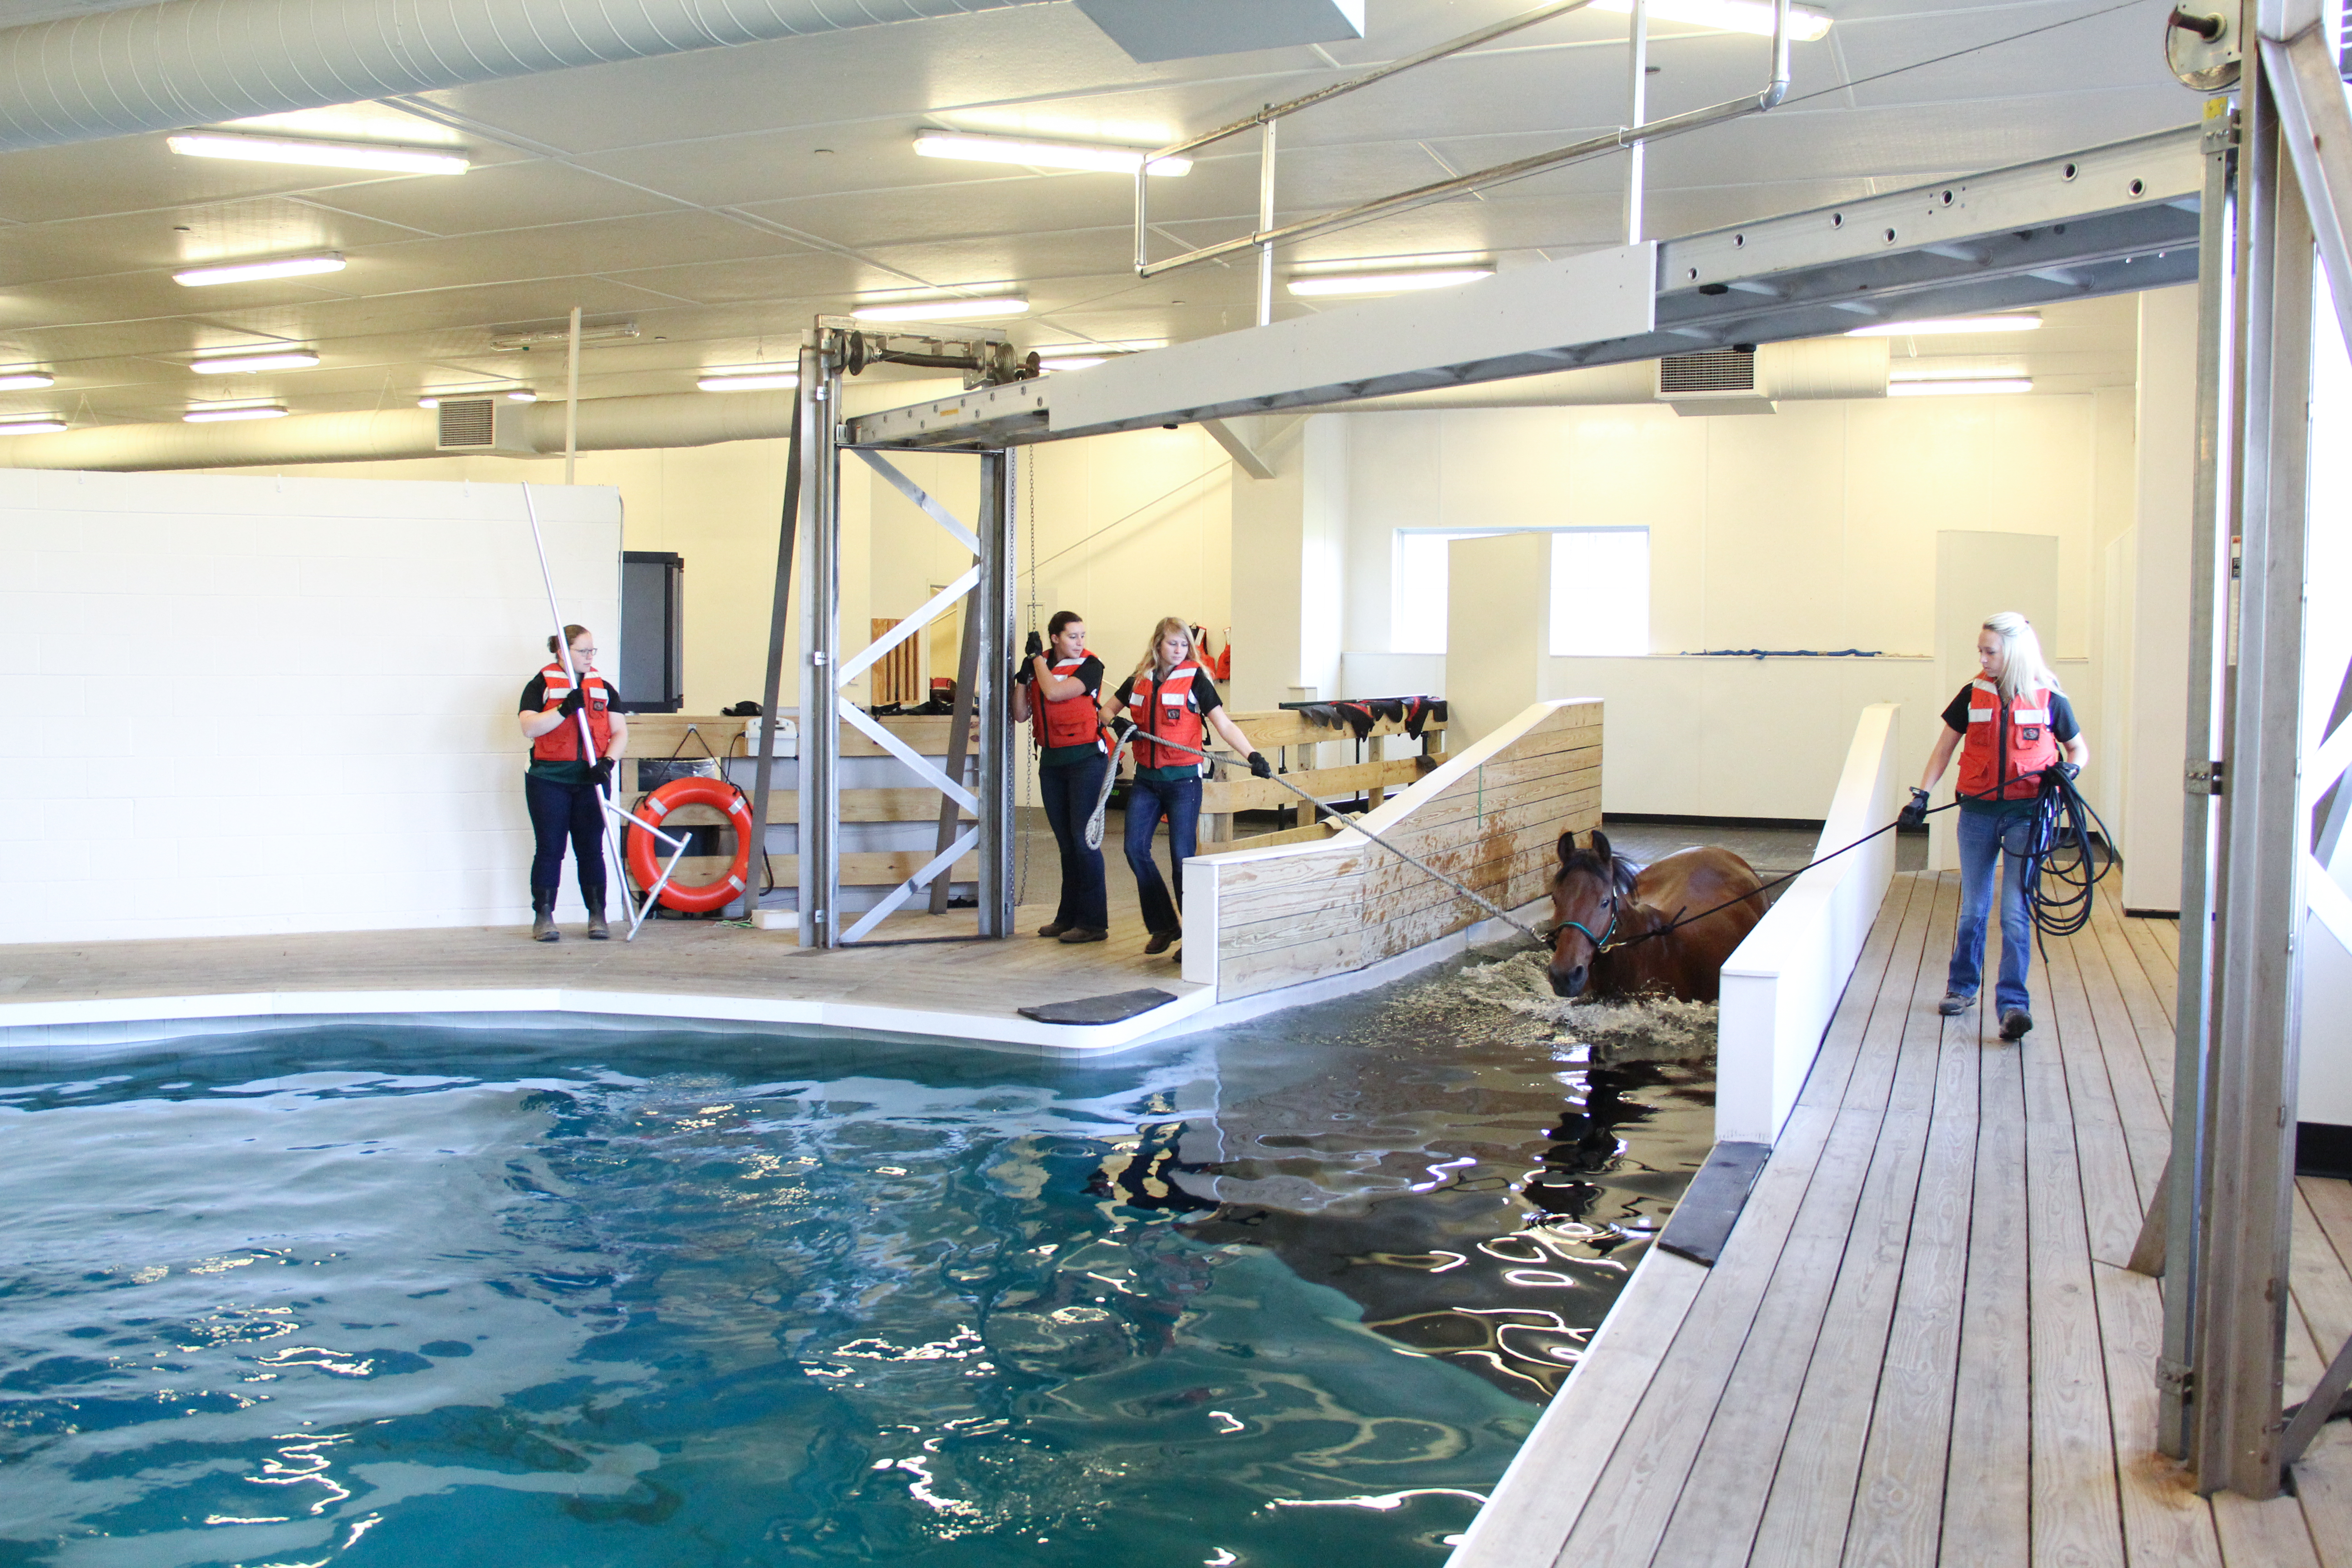 Students in the Equine Rehabilitation and Therapy program swimming a horse